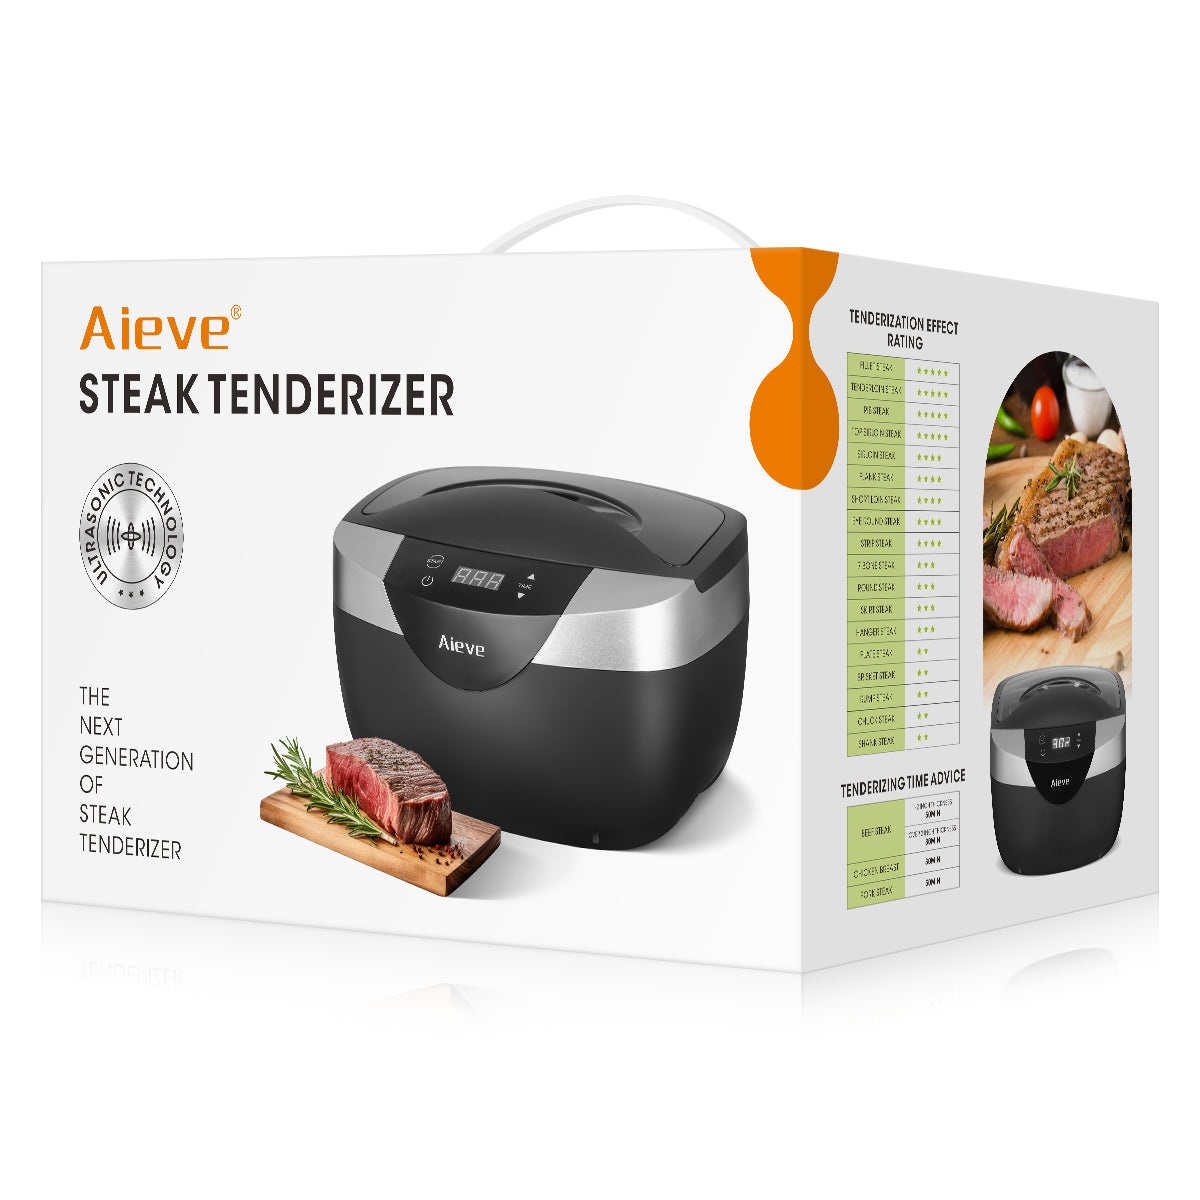 Aieve steak tenderizer. Effectively improves the tenderness of steaks, increase value to even cheap steaks and saves you money